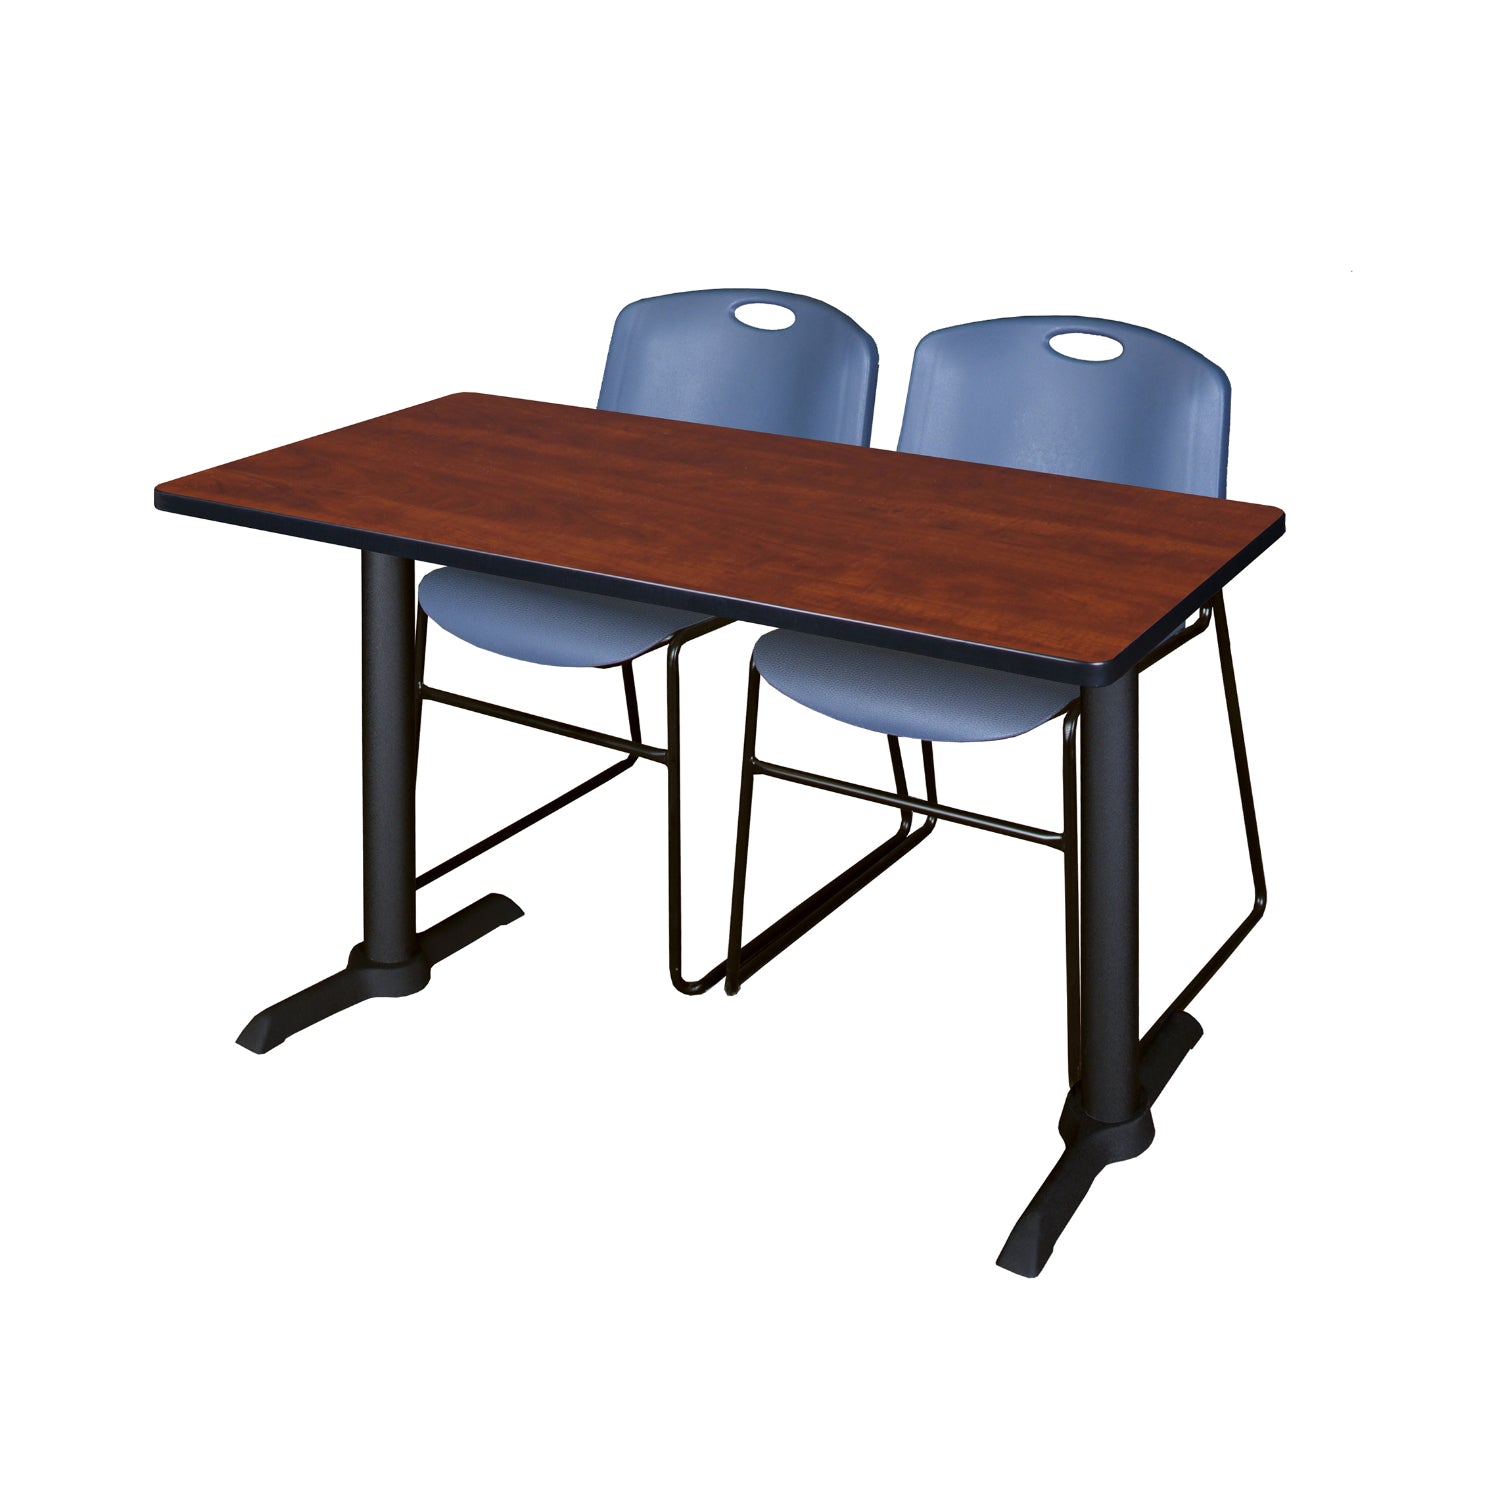 Cain Training Table and Chair Package, Cain 48" x 24" T-Base Training/Seminar Table with 2 Zeng Stack Chairs